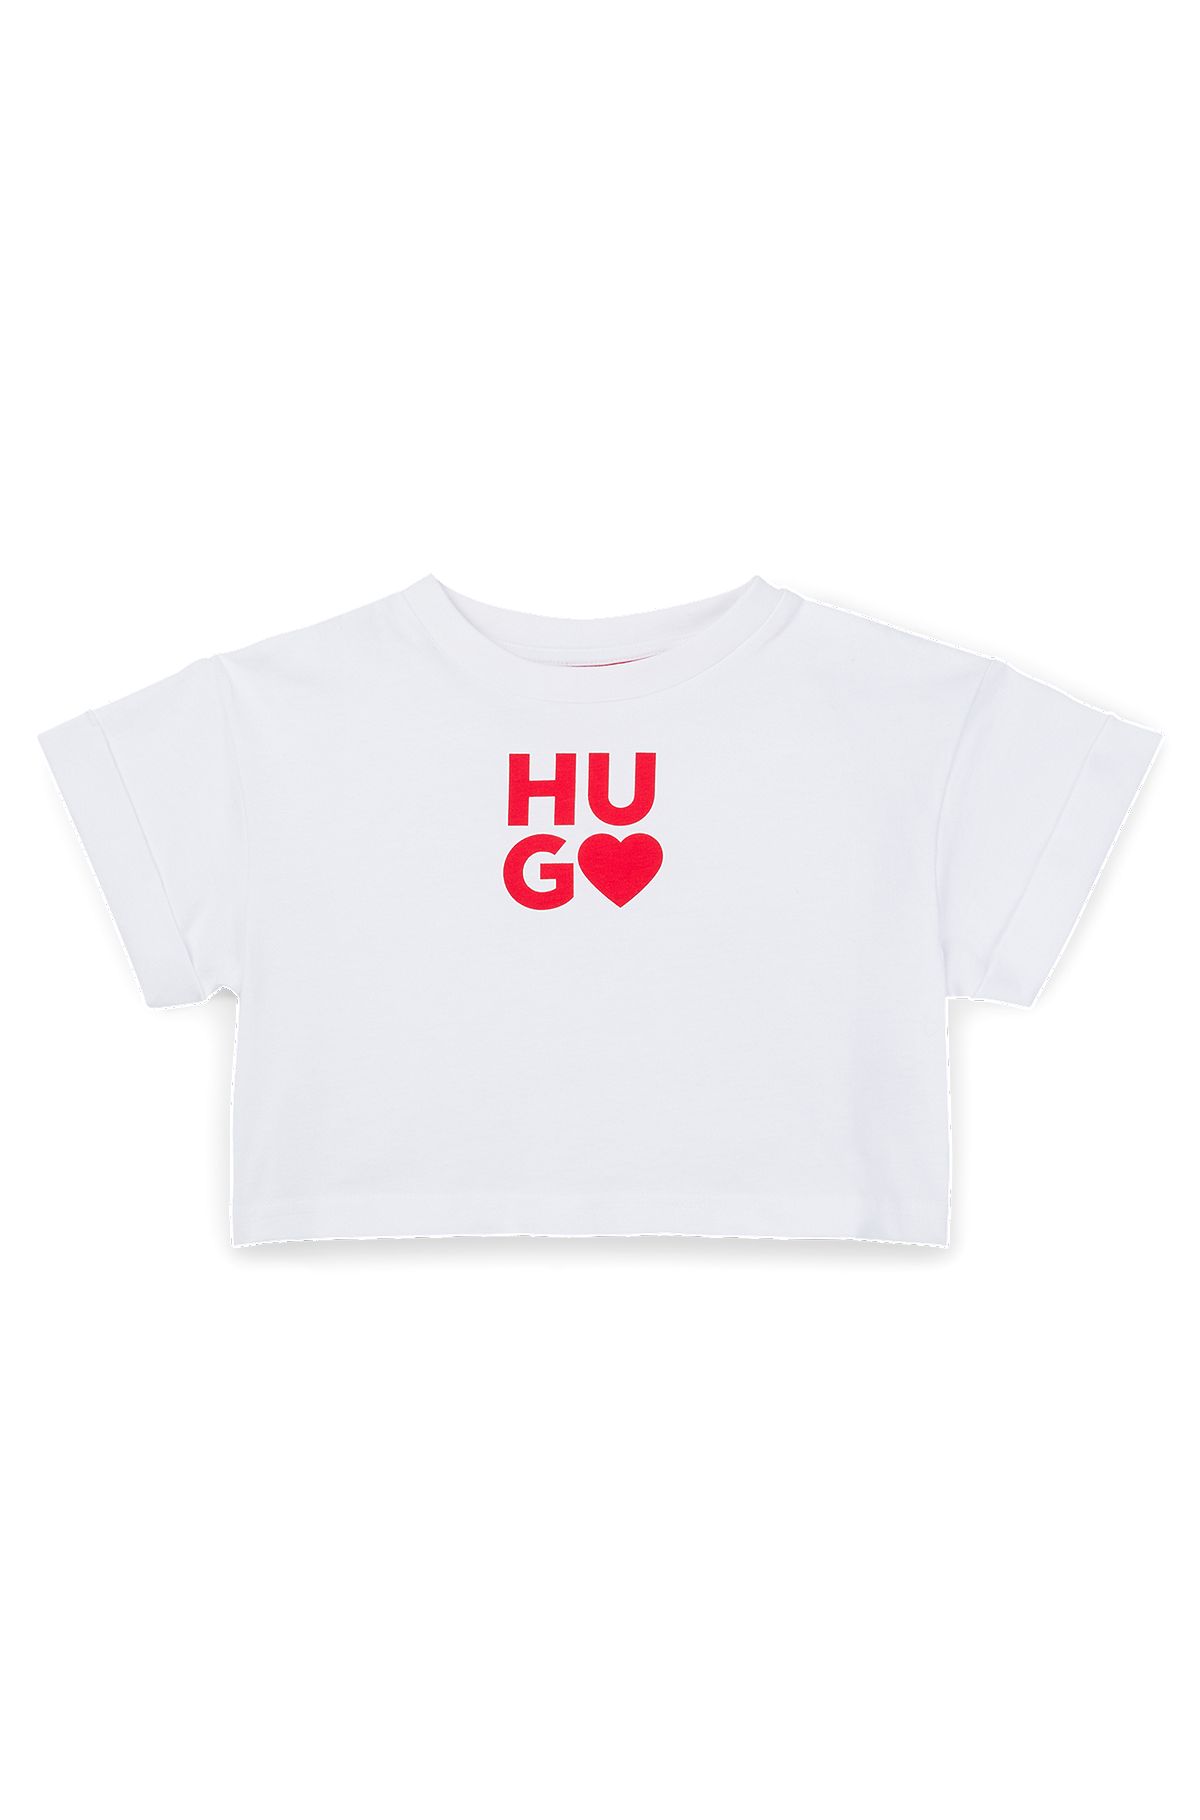 Kids' T-shirt in pure cotton with logo print, White